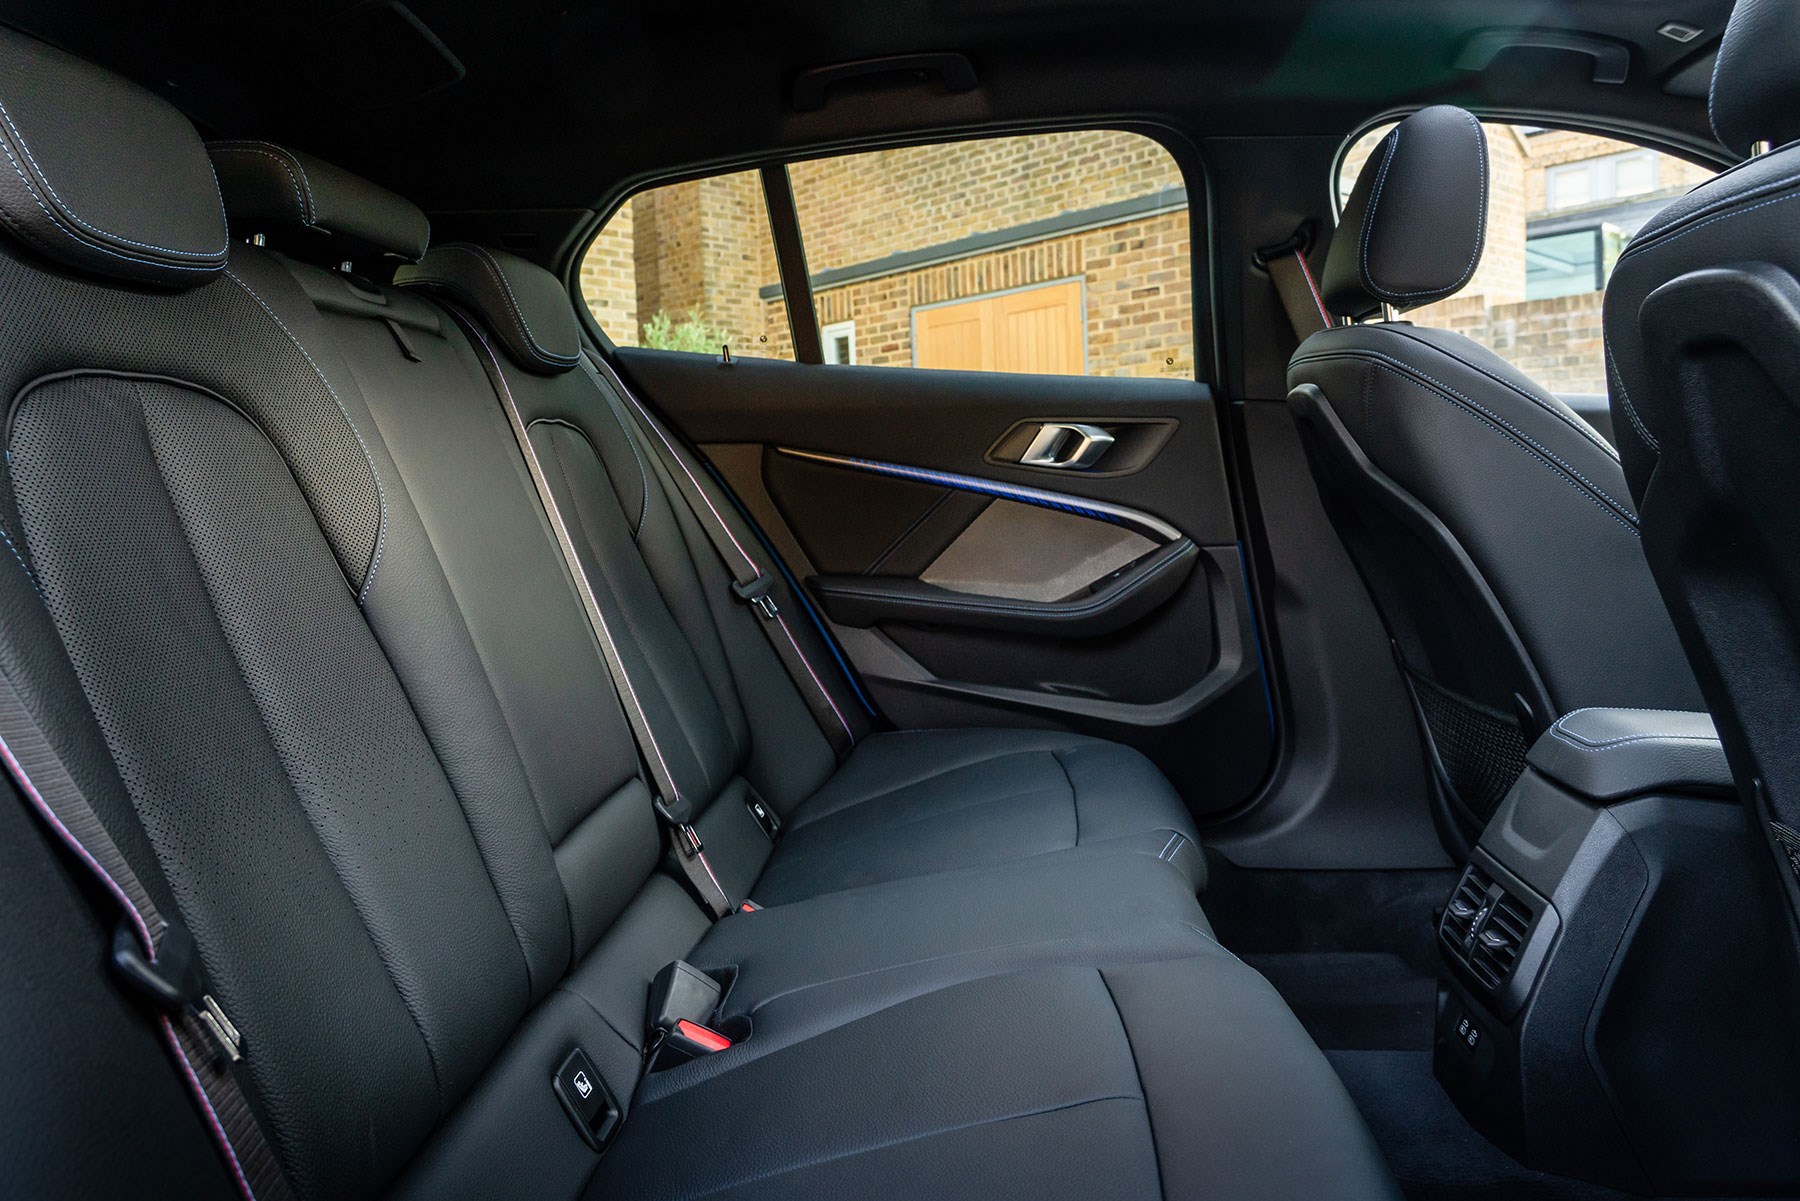 BMW 1-series rear seats: more space than before, but still quite a tight fit